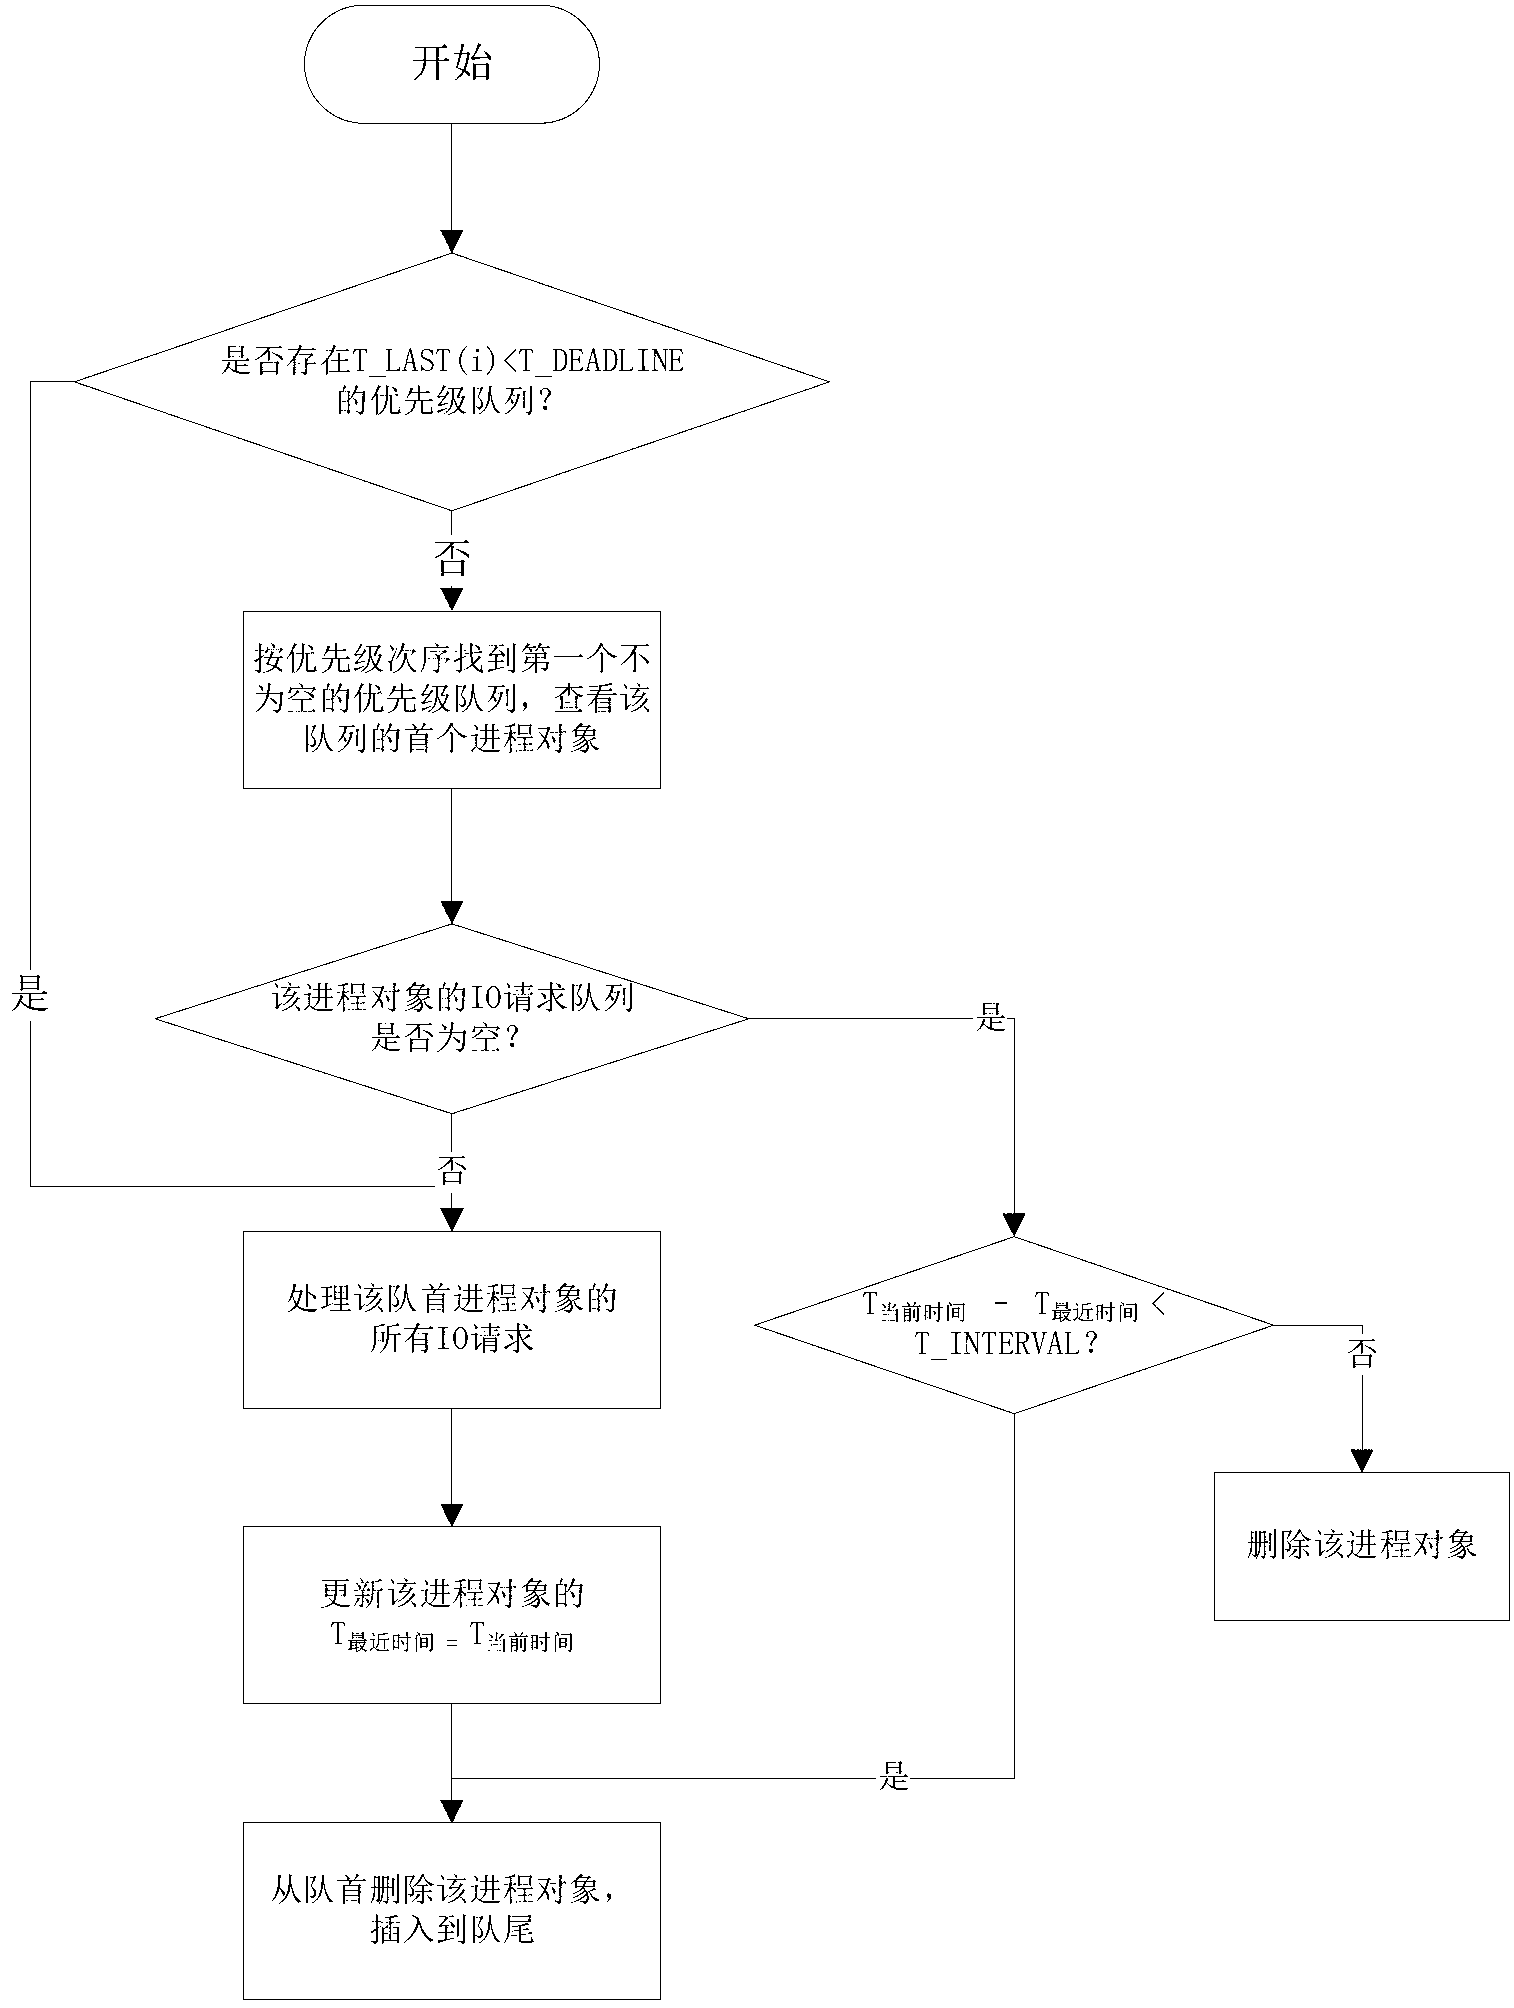 Distributed file system based IO (input output) request dispatching method and system